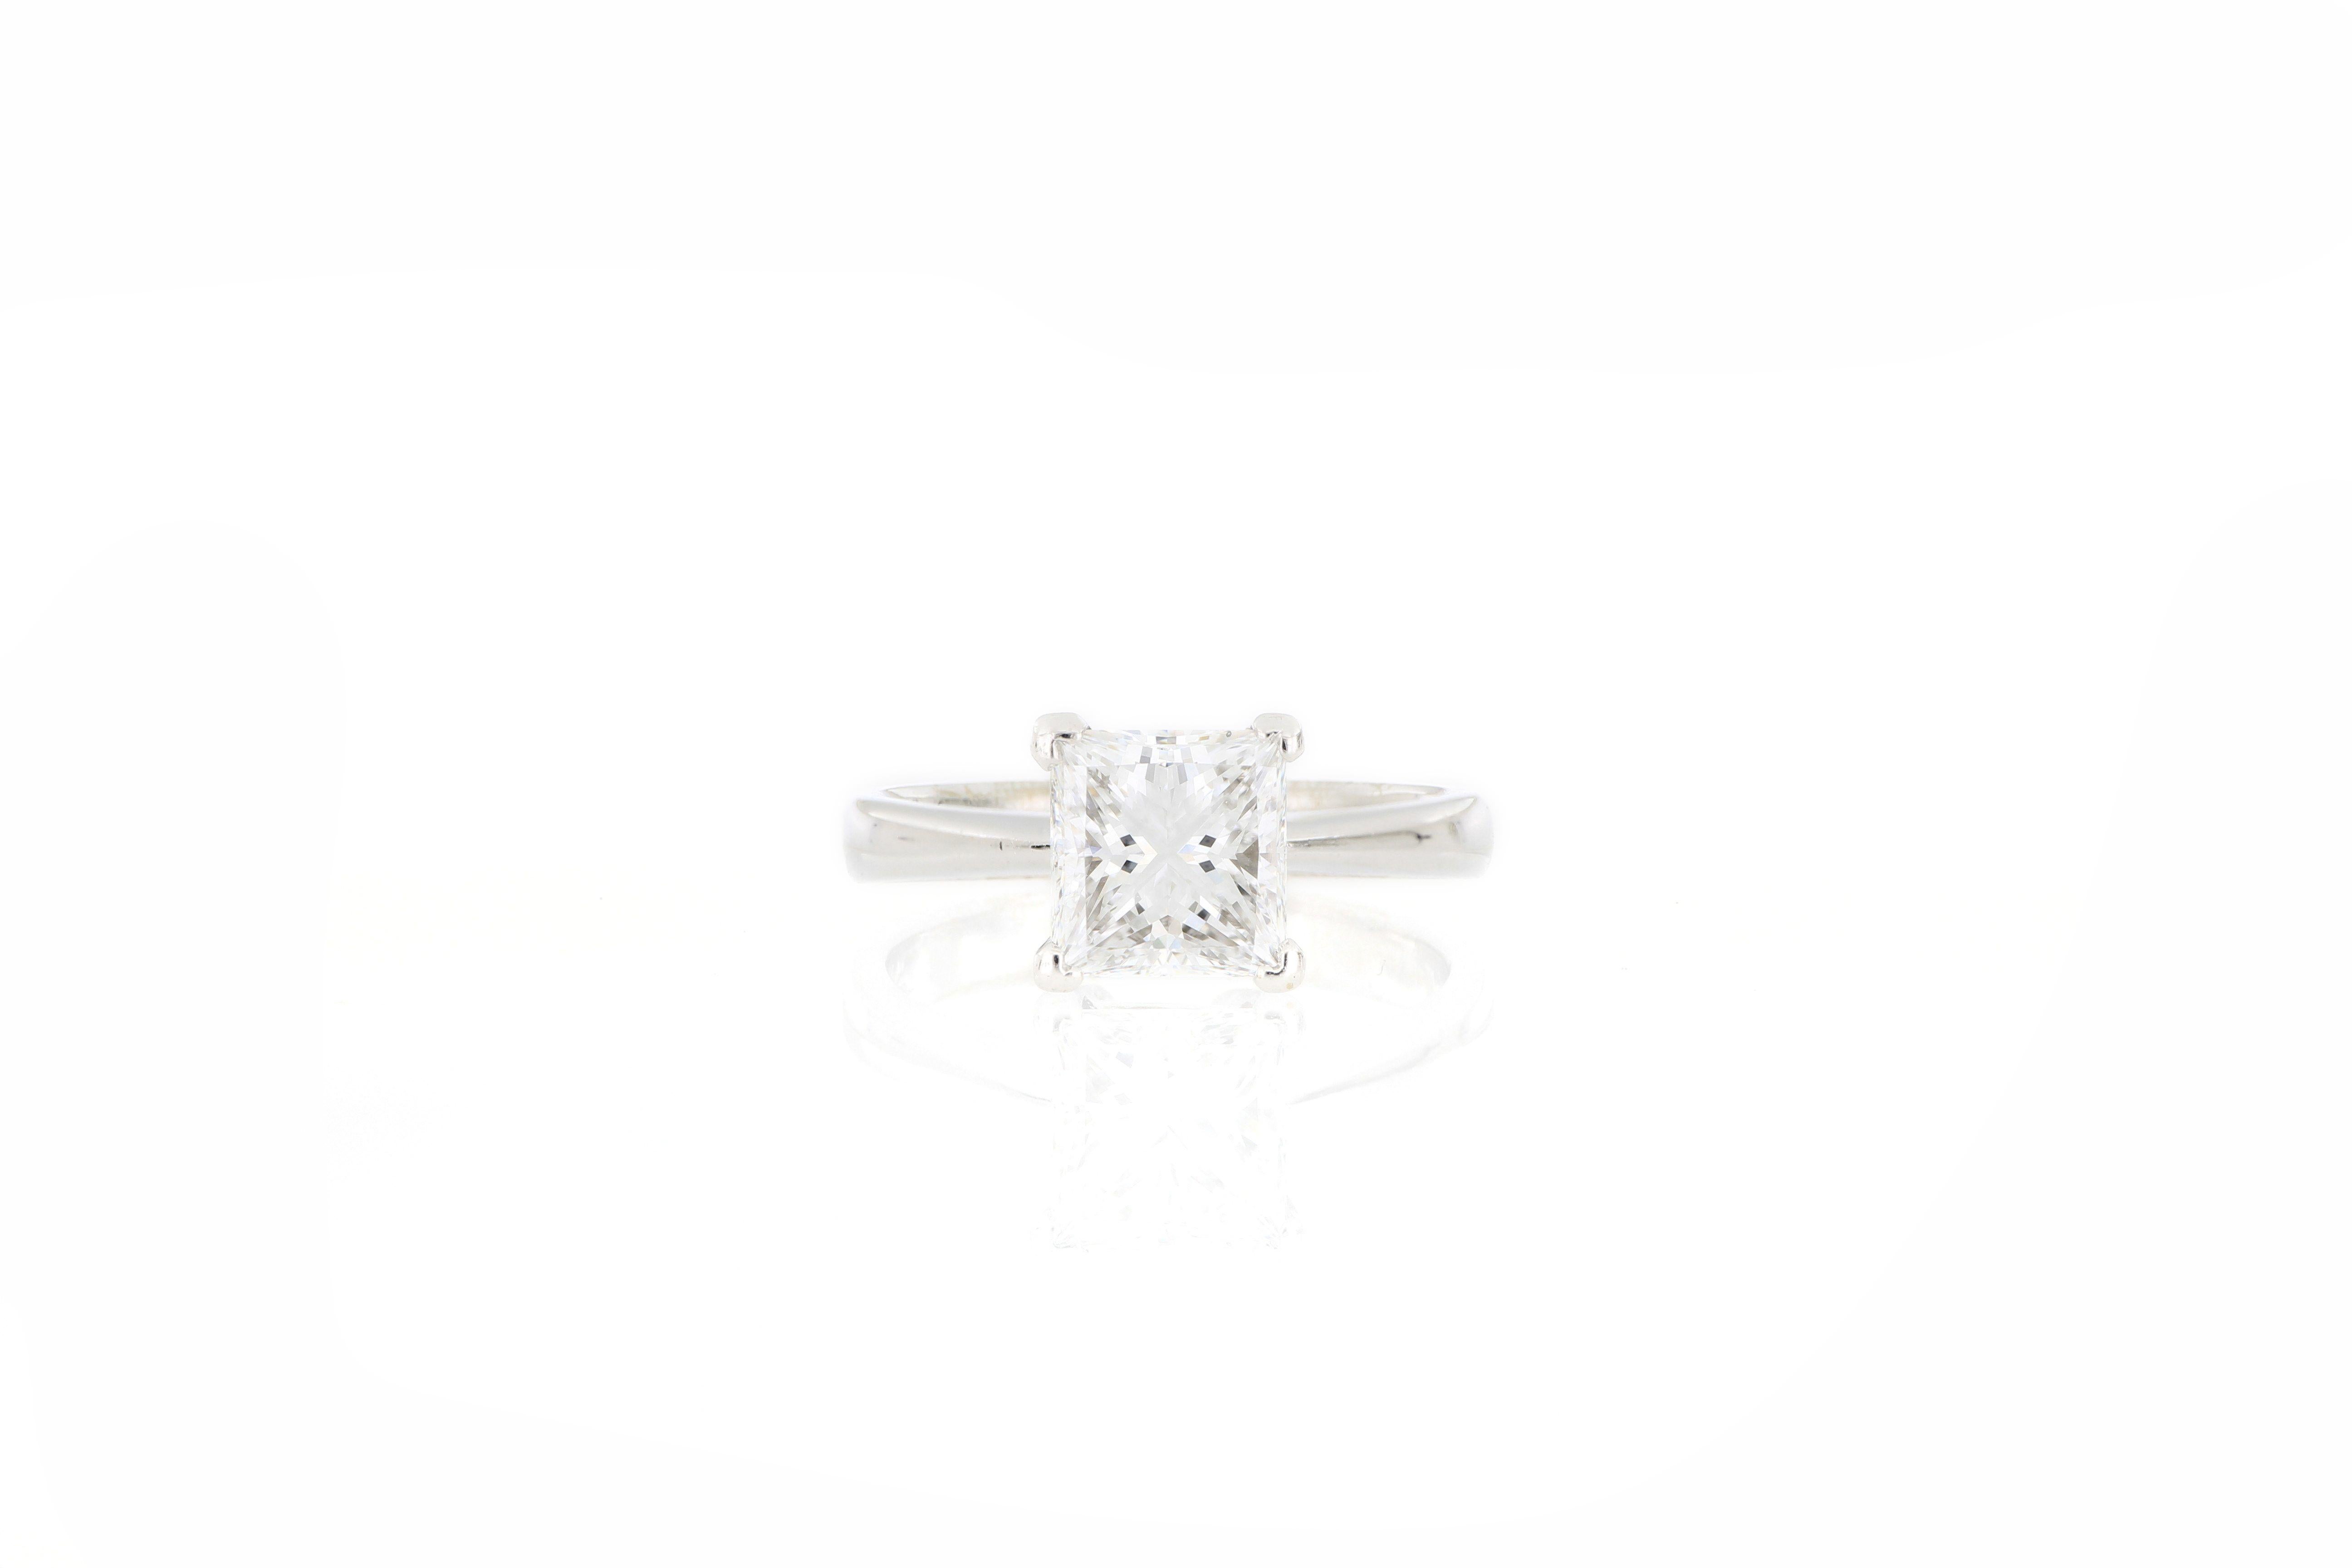 A square modified brilliant diamonds weighing 2.00 carats, mounted in 18 karat white gold. A very beautiful solitaire ring set with a diamond of top colour (D) grade, clarity grade of VS2 and very good polish and symmetry, without